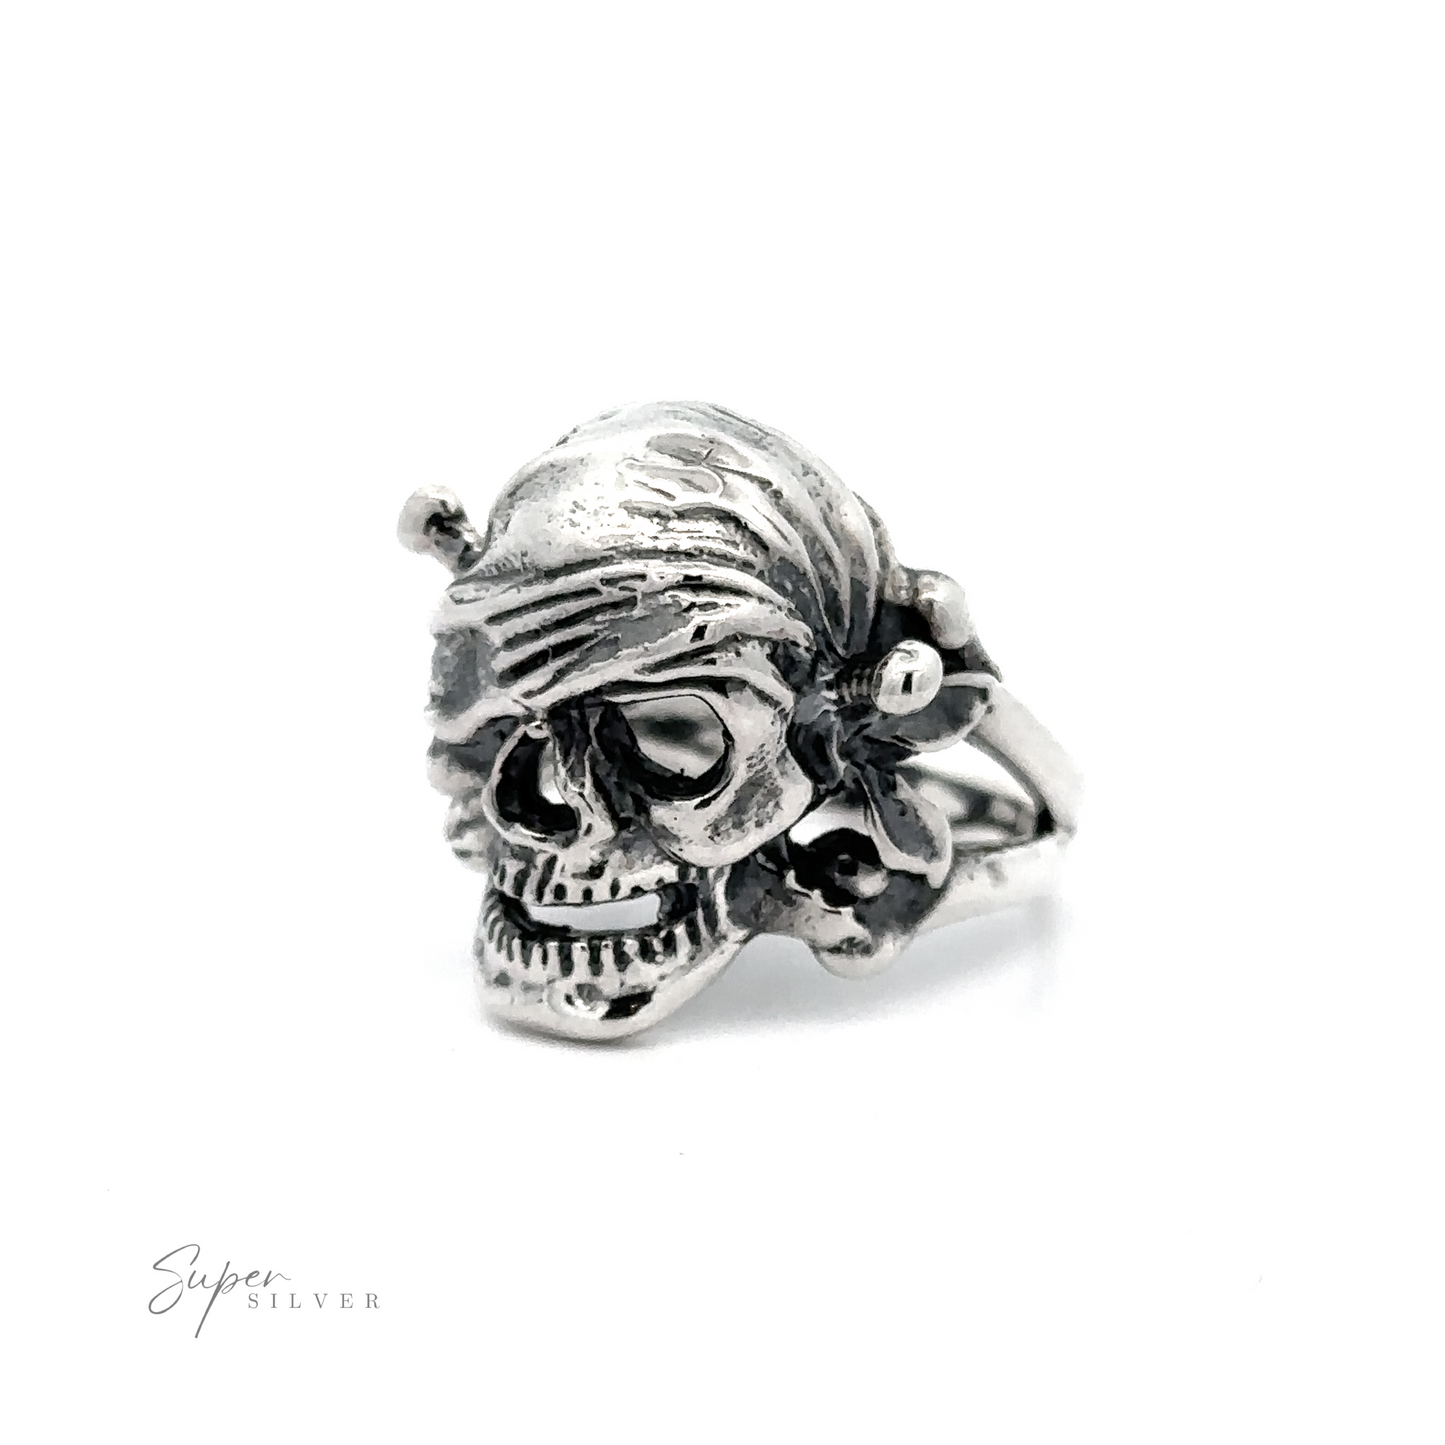 
                  
                    A Large Pirate Skull And Crossbones Ring with intricate details and polished finish, displayed on a white background.
                  
                